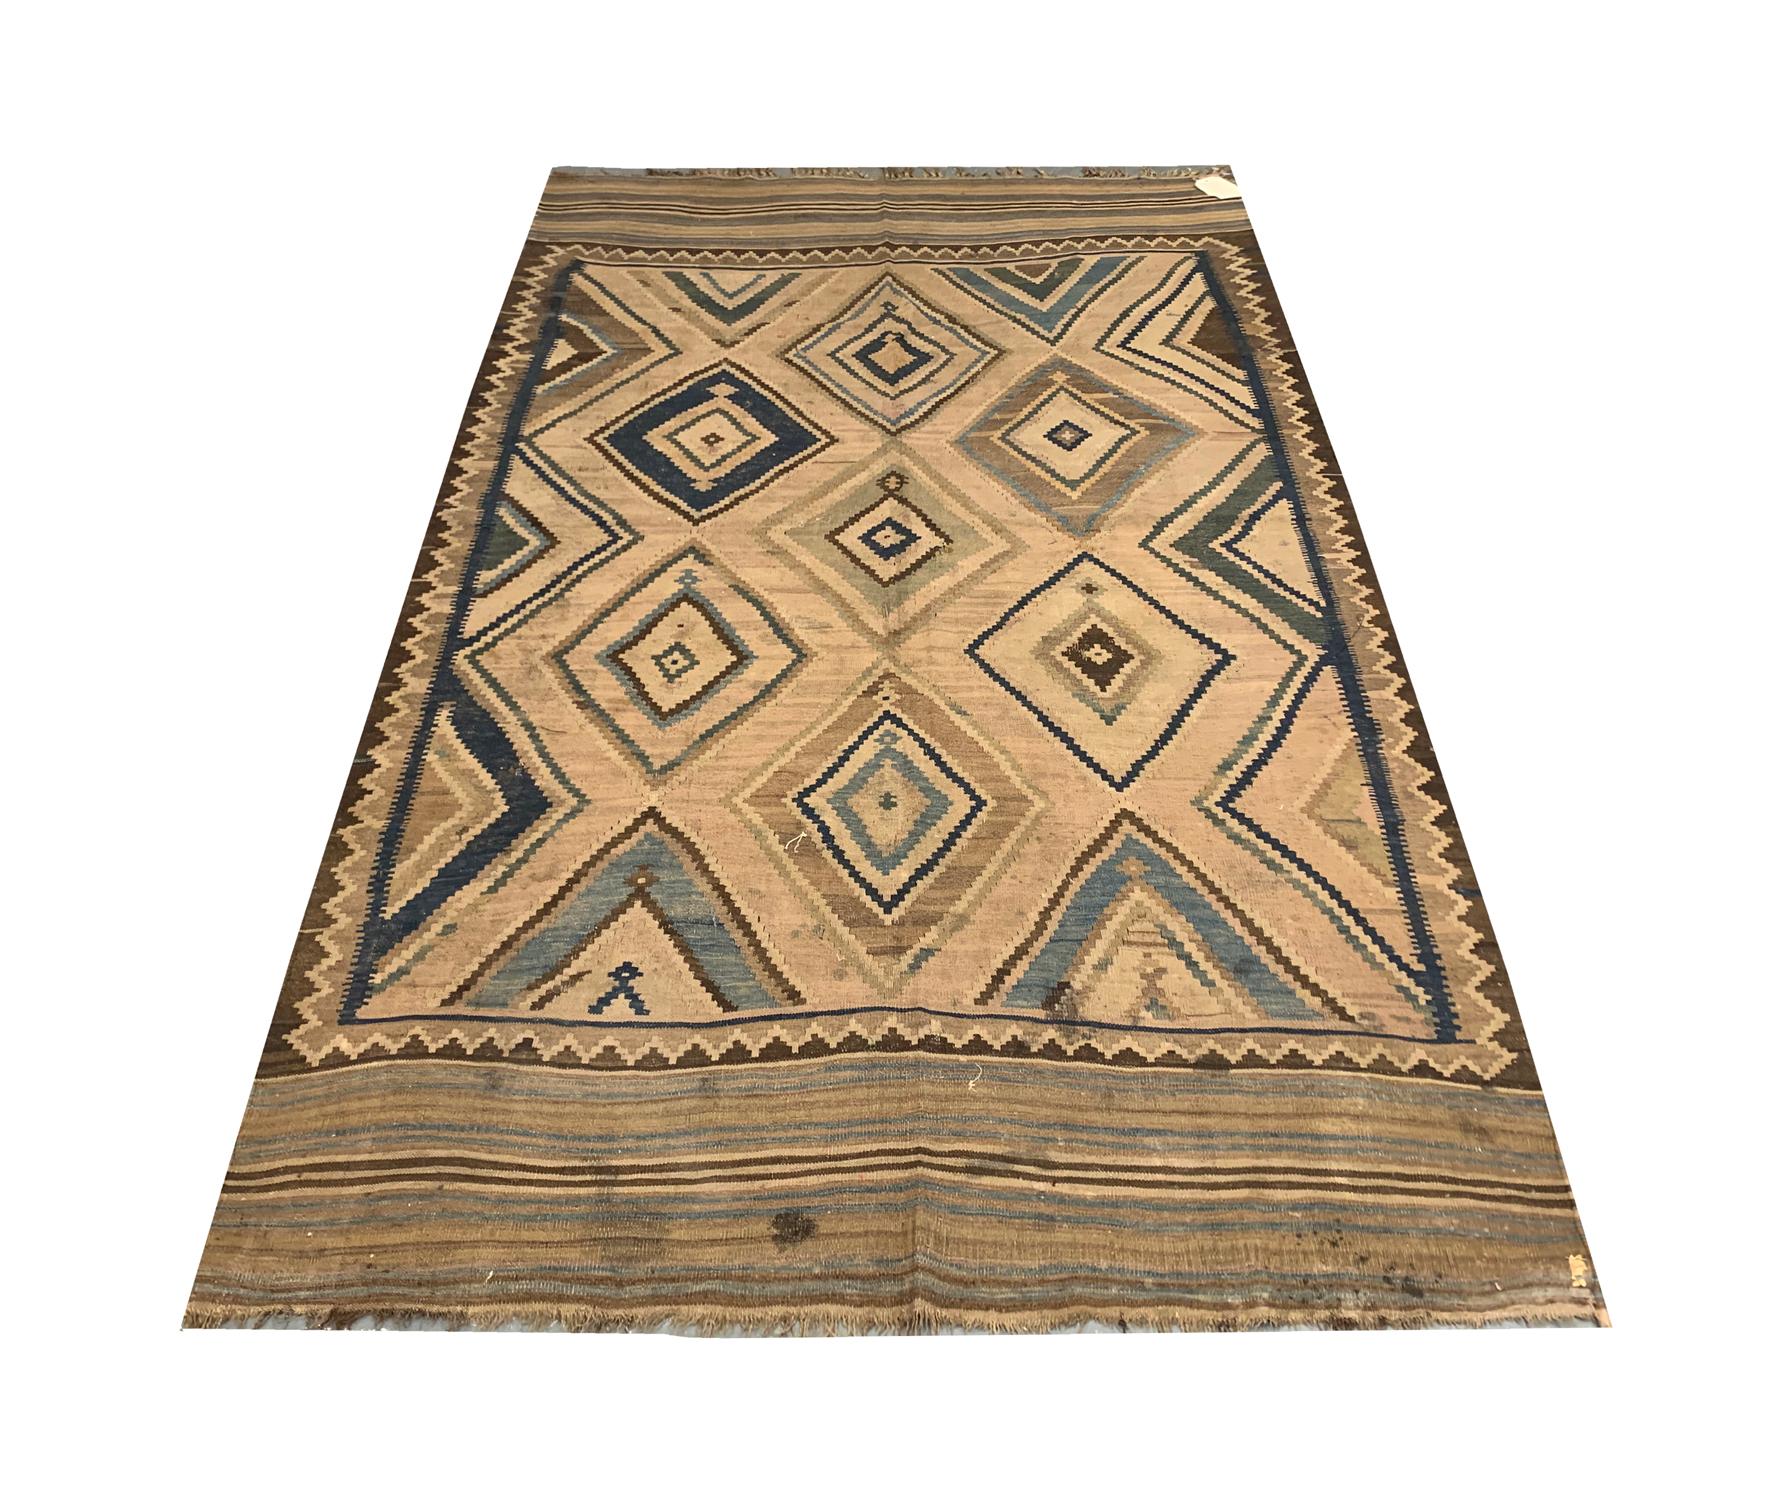 This geometric area rug is a fine wool kilim woven by hand in the 1890s. Featuring a bold diamond geometric design through the centre woven in accents of blue and brown on a subtle cream/beige background. This is then framed by a zig-zag and stripe